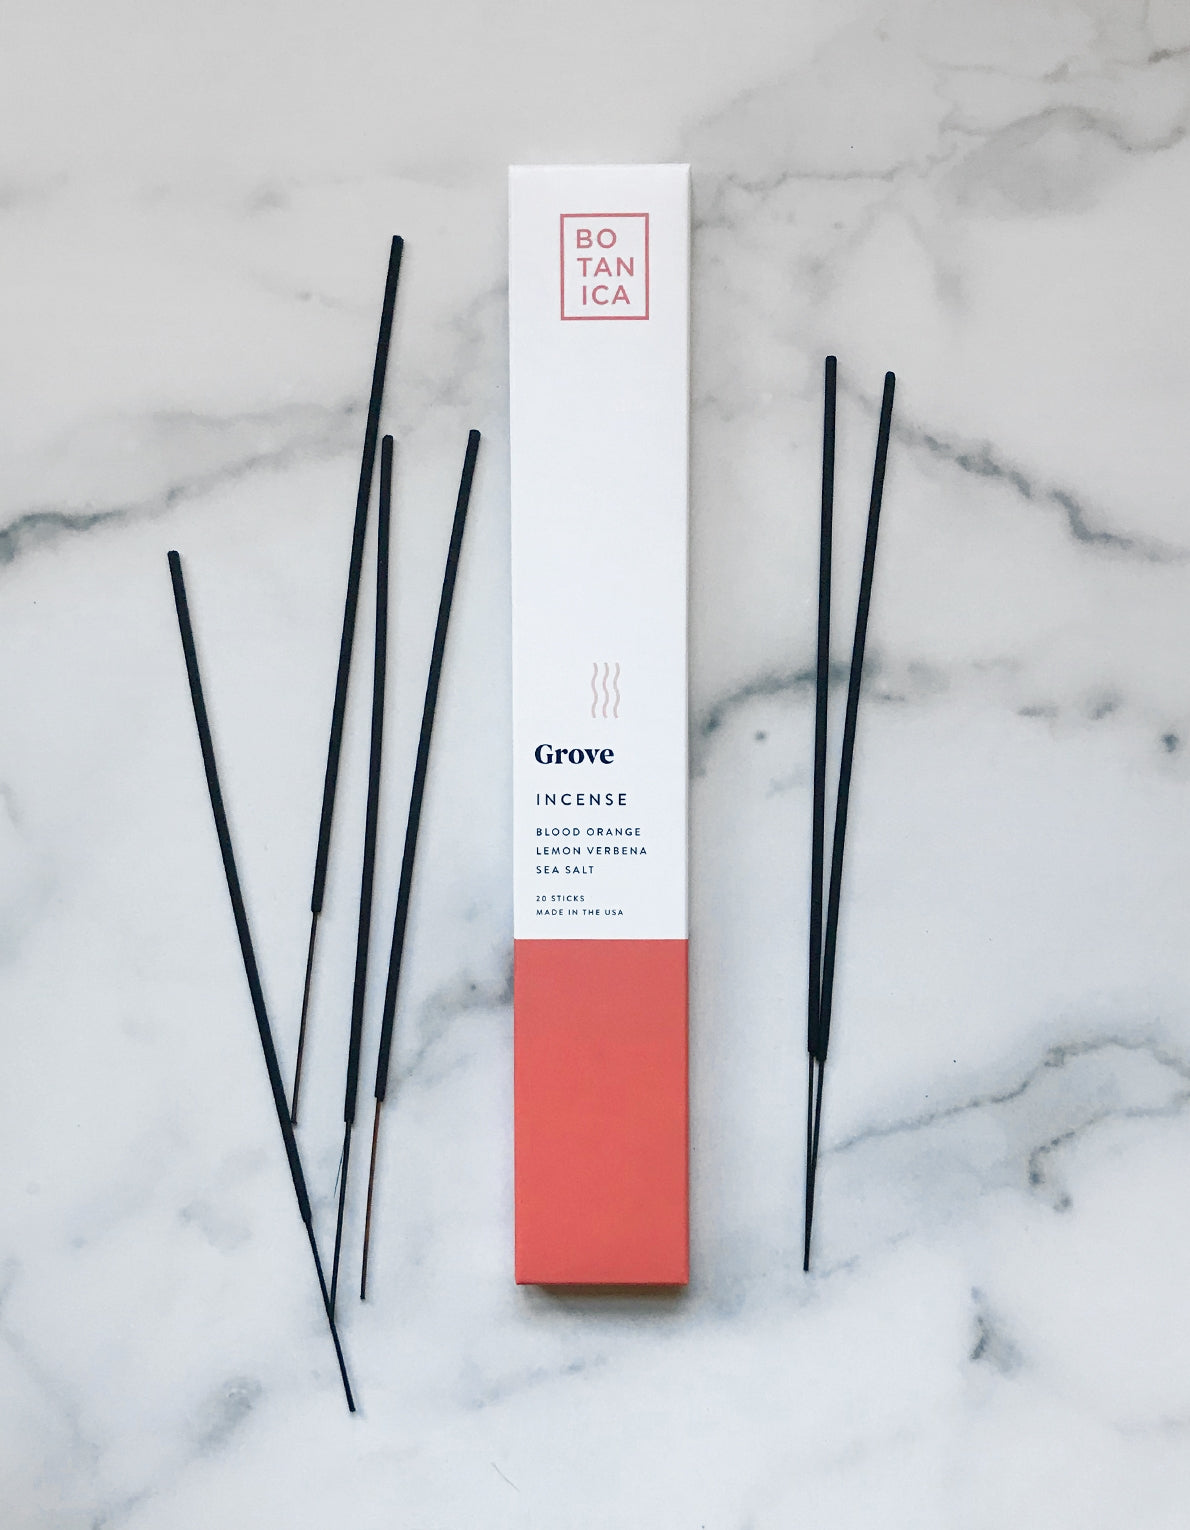 Botanica grove incense. Made with high-quality fragrance blends, plus essential oils for a long, balanced ritualistic experience–sure to make any dwelling feel like a luxurious retreat. Scent notes of blood orange, sea salt, and lemon verbena.